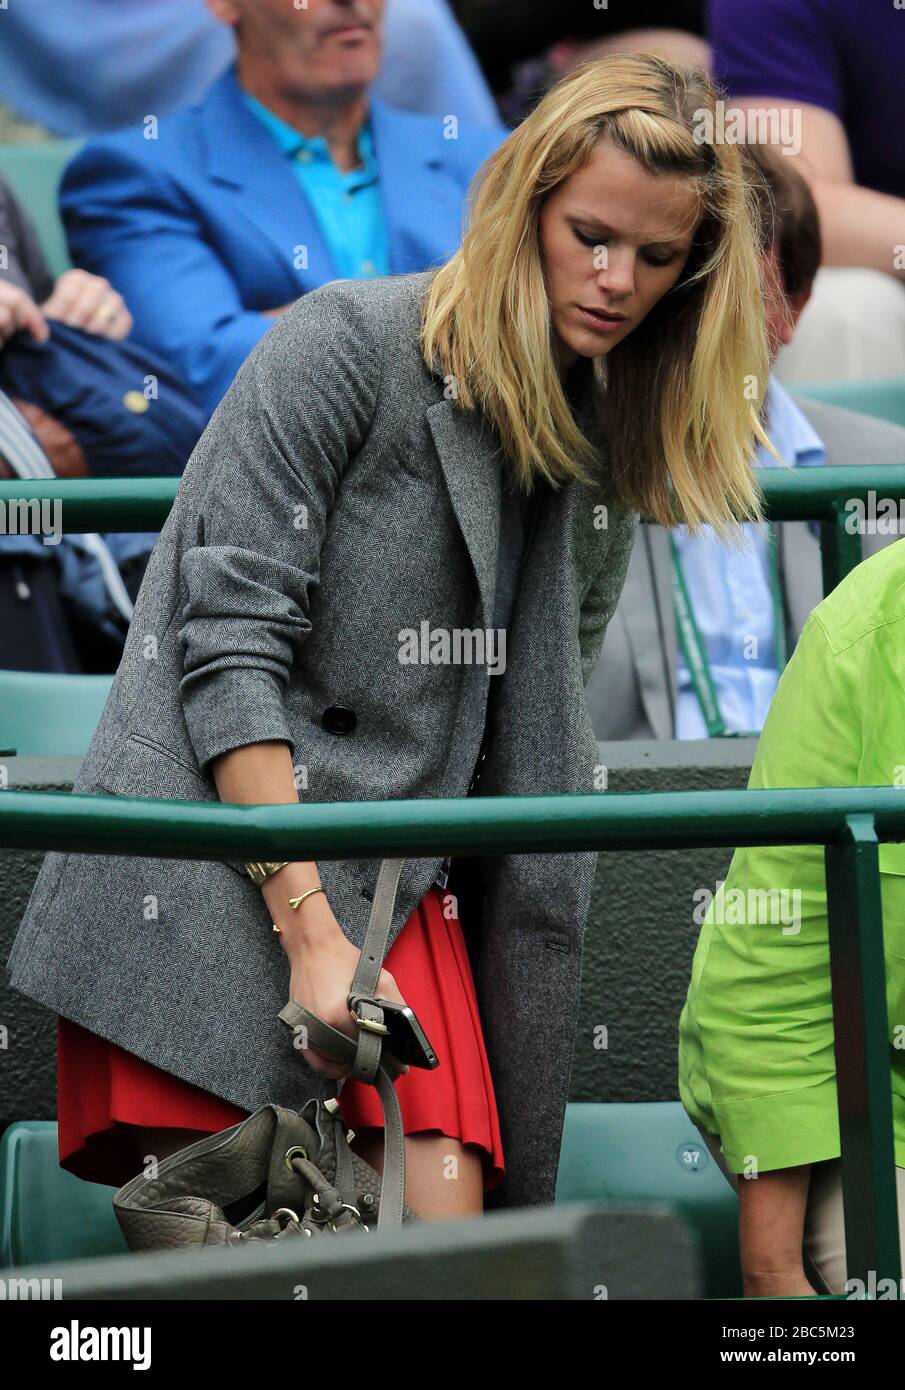 Brooklyn Decker, wife of USA's Andy Roddick, takes her seat in the stands  Stock Photo - Alamy